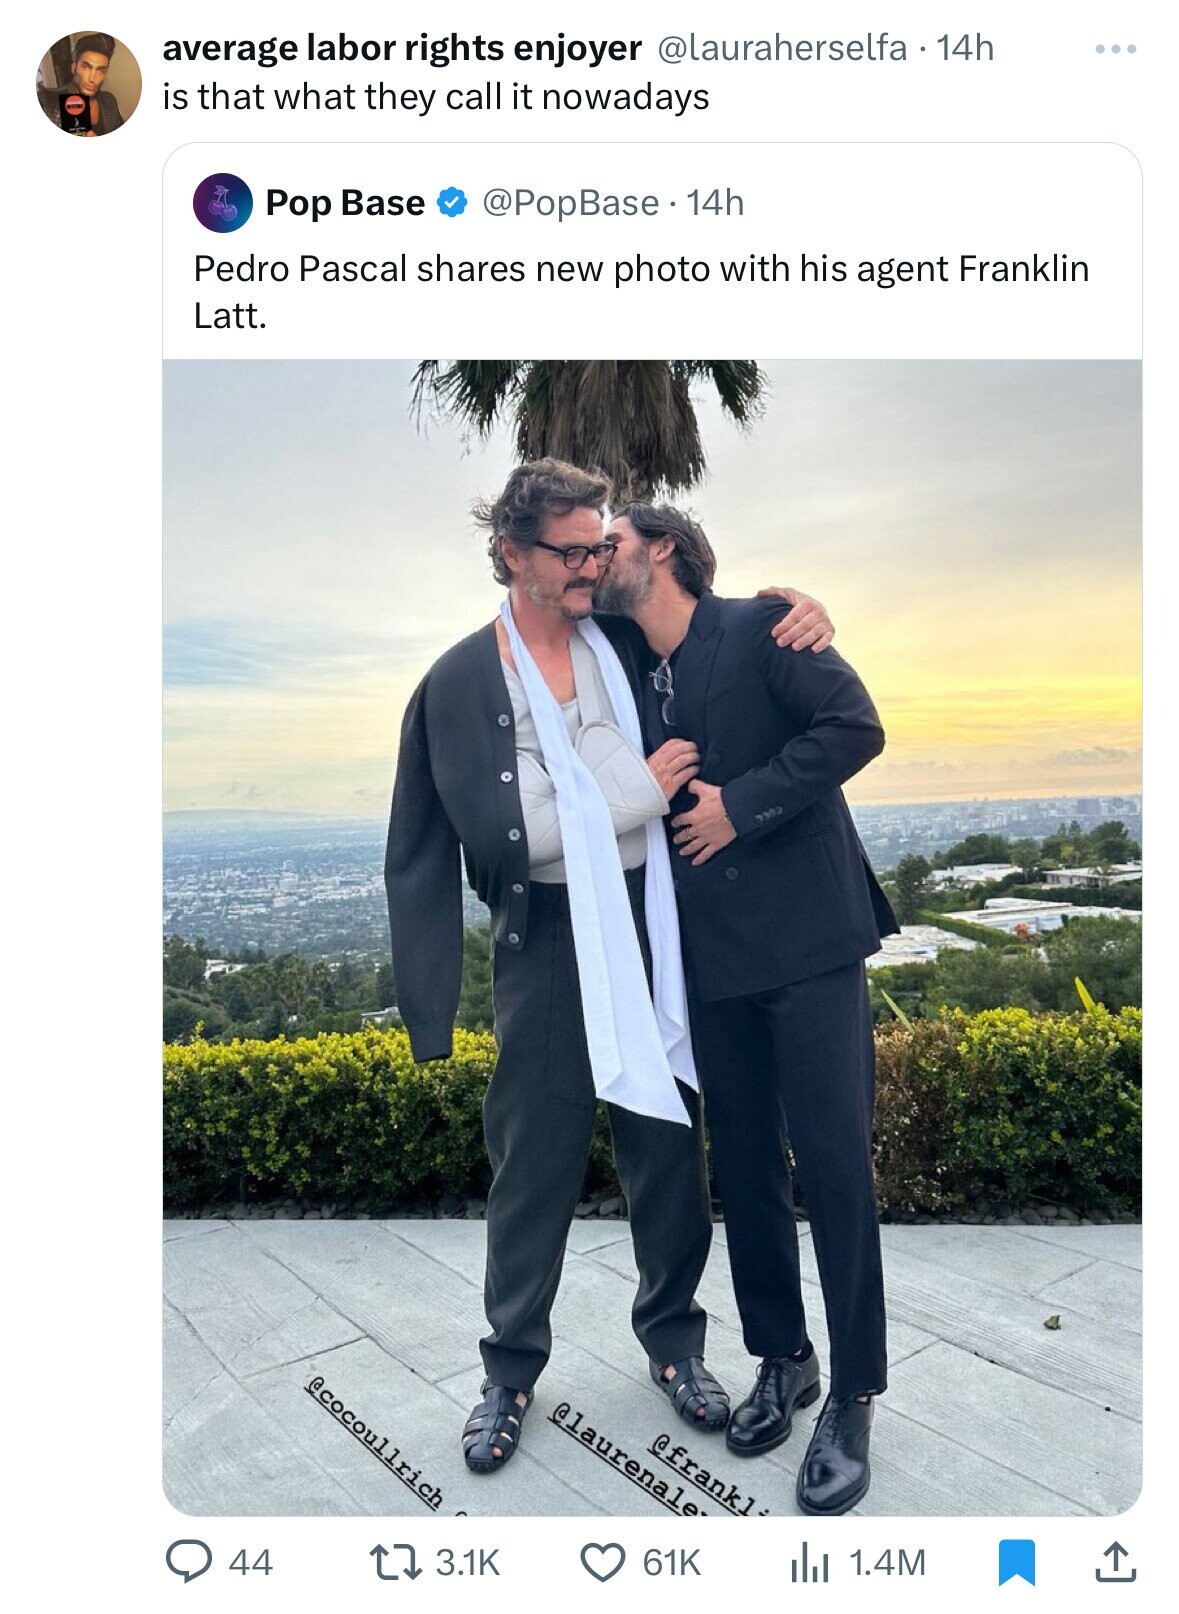 suit - 0 average labor rights enjoyer 14h is that what they call it nowadays Pop Base 14h Pedro Pascal new photo with his agent Franklin Latt. 44 . 5332 61K 1.4M